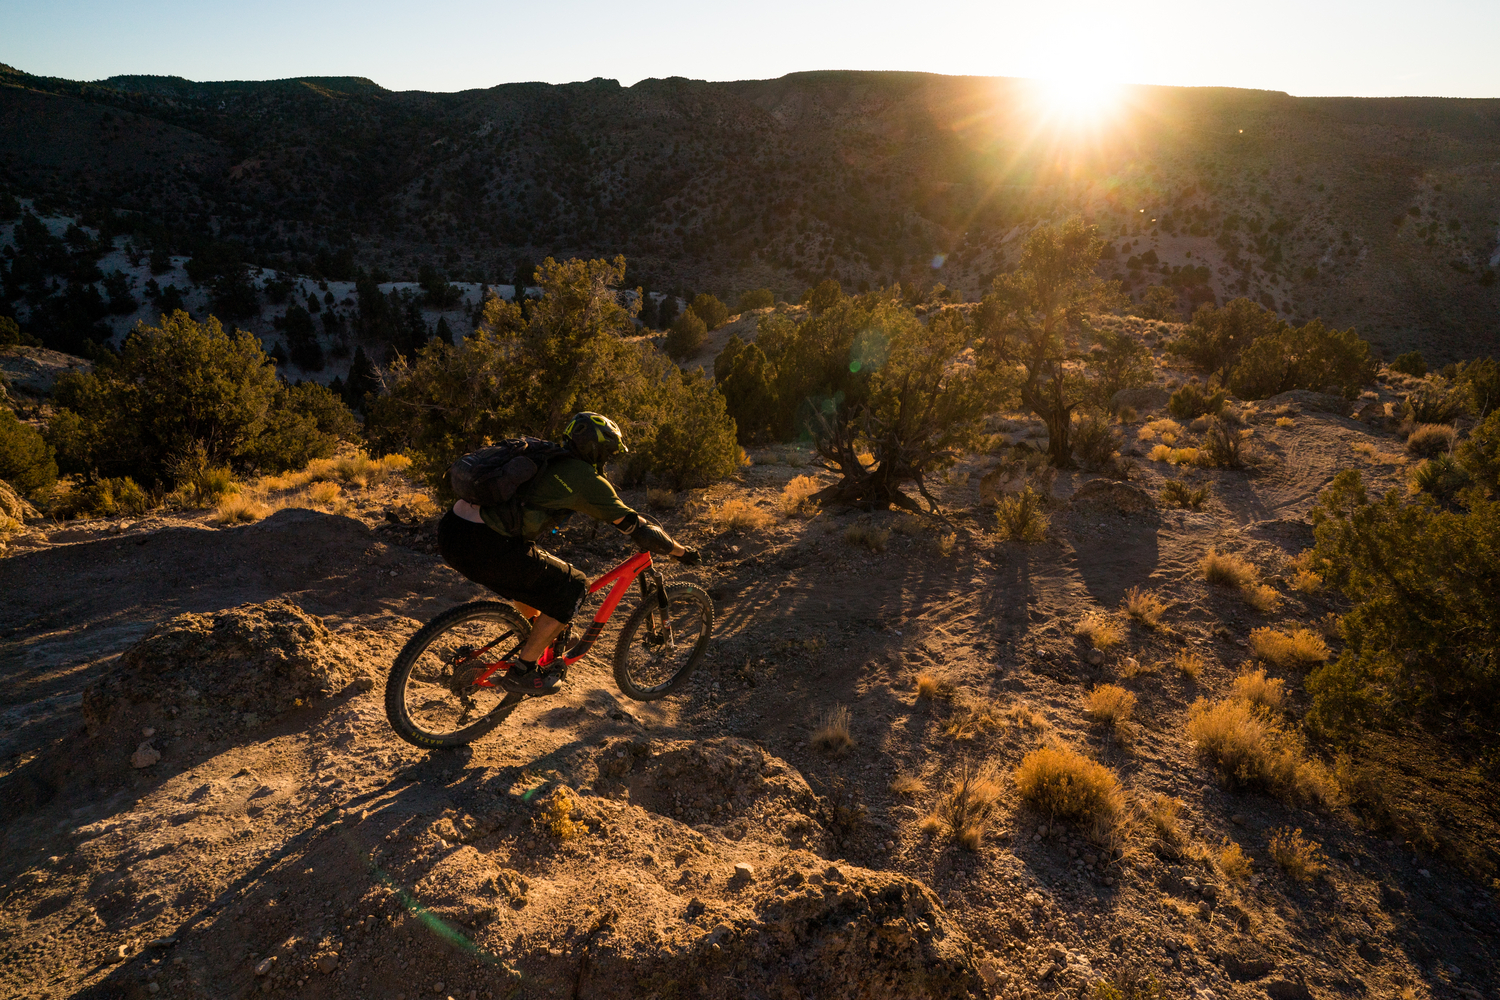 "Mountain biker dropping off a large rock feature in a desert environment."